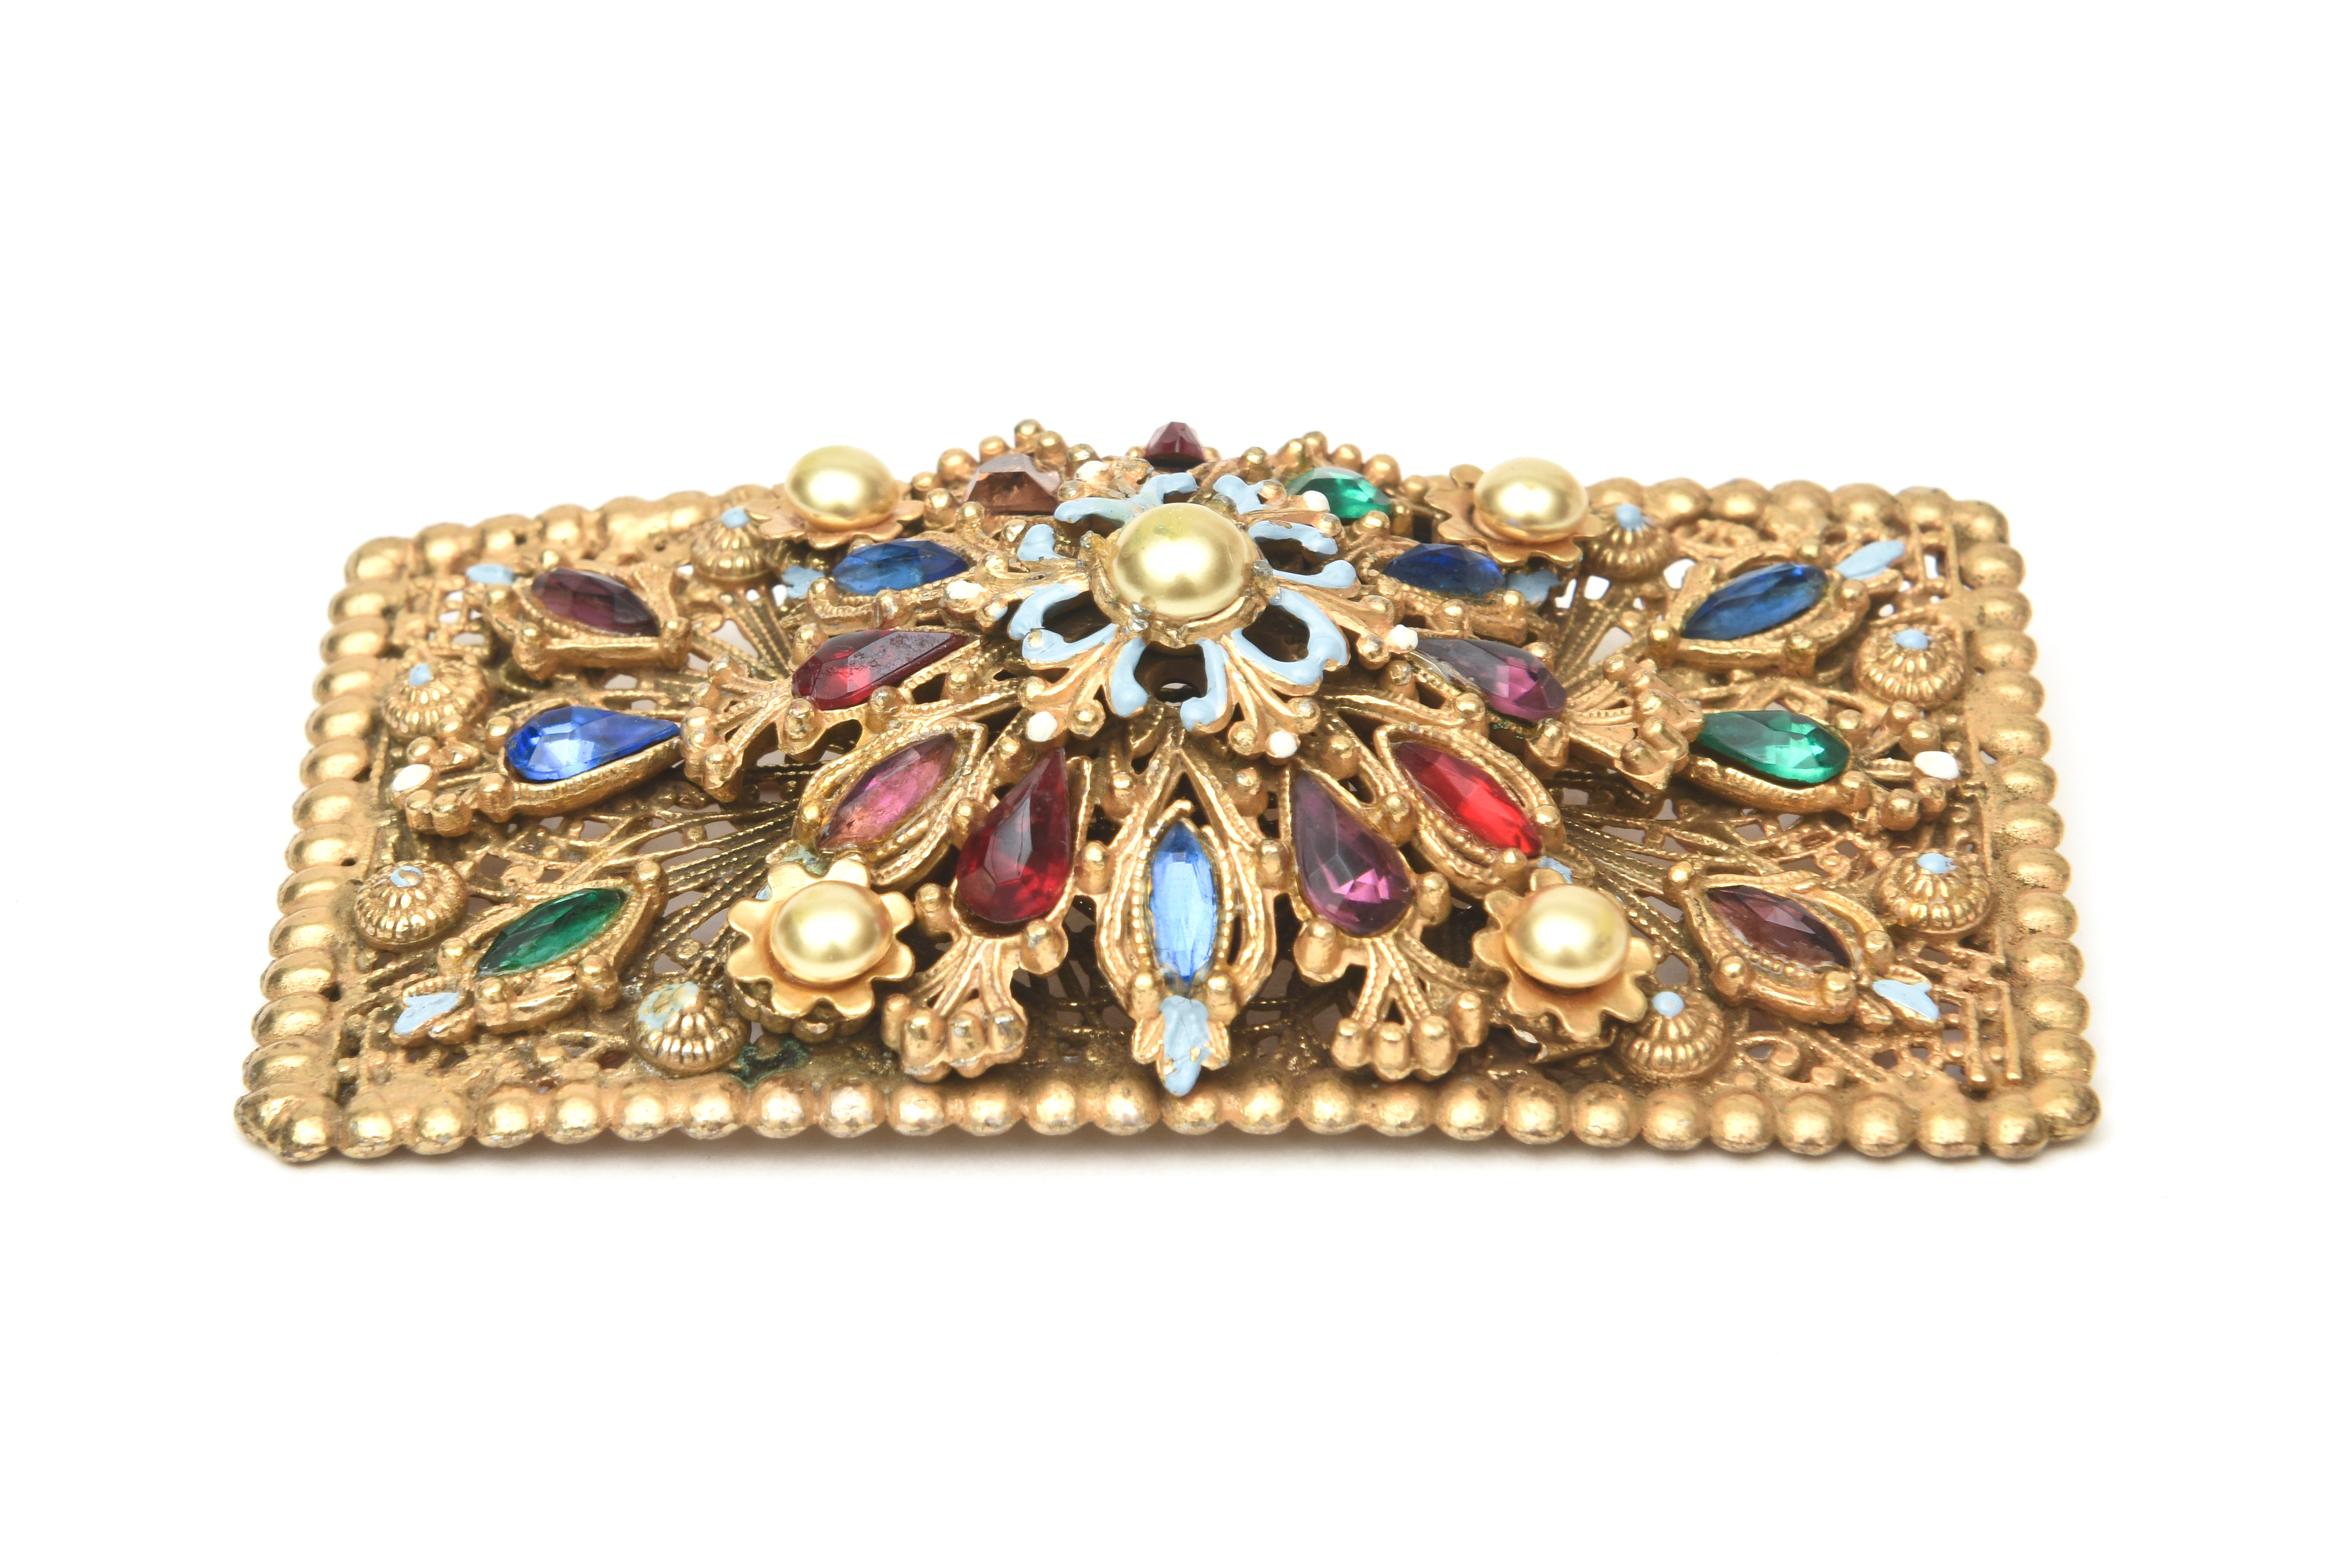 This stunning and amazing pin made for the Thieves of Baghad movie is encrusted with vibrant color and ornate details. it is square with colored glass in varying forms, enamel and faux pearl. It is hallmarked Thieves of Baghad. It is gold plated and